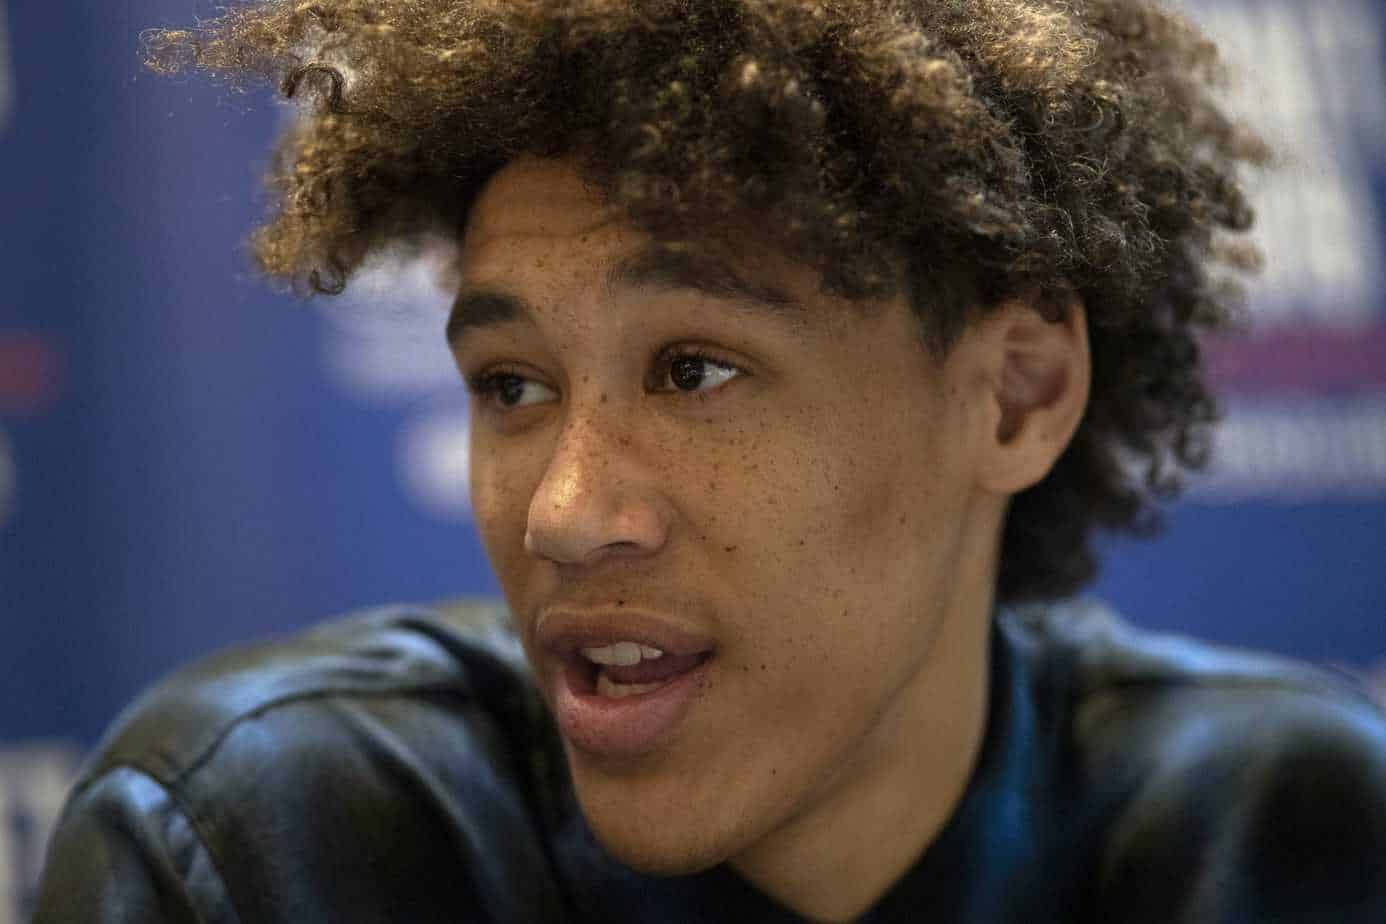 A new video revealed Jaxson Hayes telling officers that he "can't breathe" while arrested earlier in the offseason. An investigation is underway